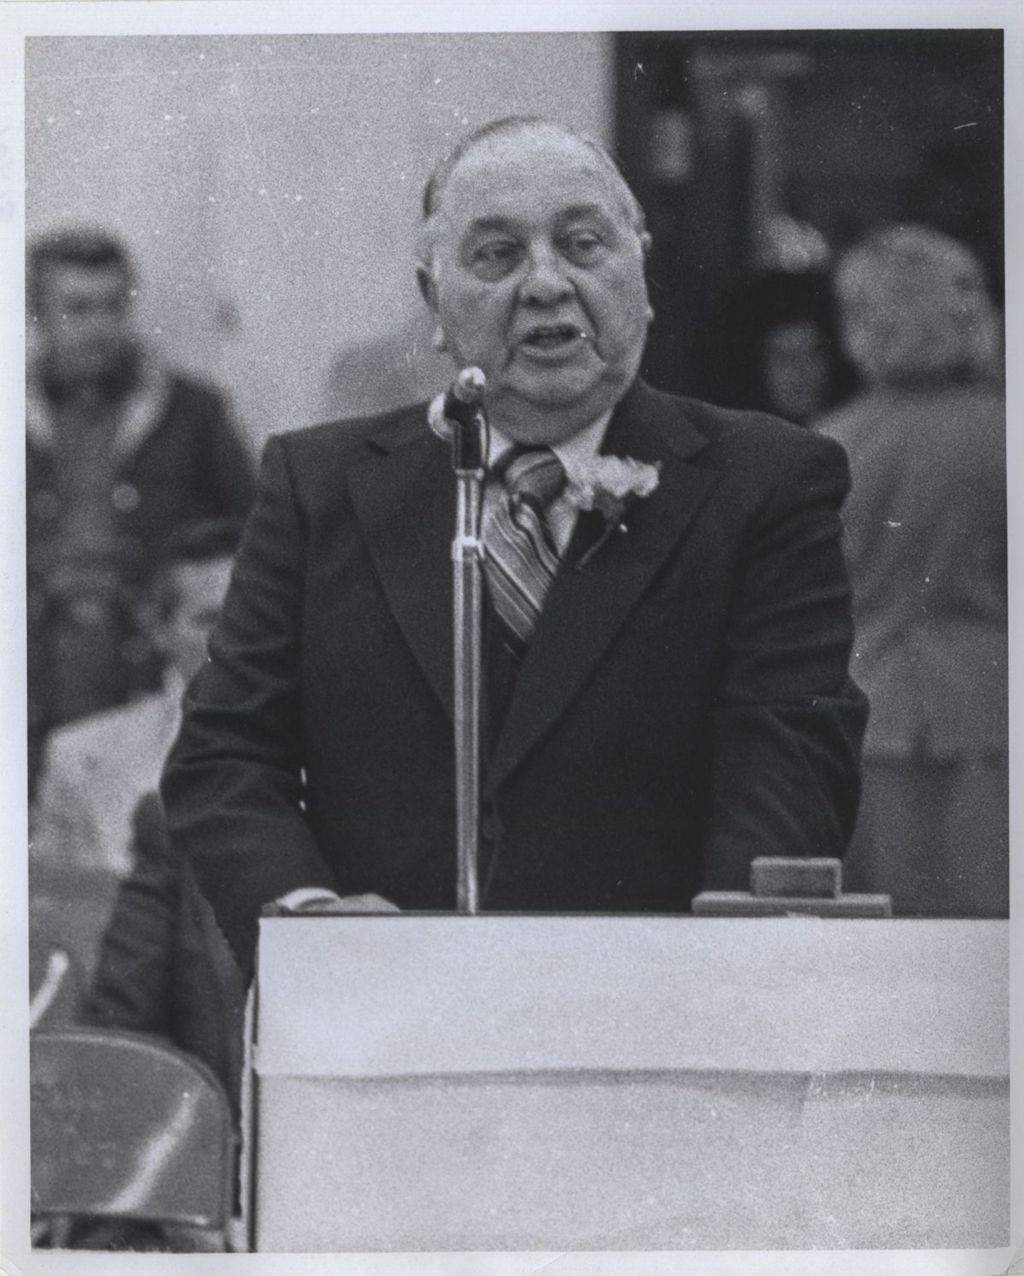 Miniature of Richard J. Daley speaking at a podium on his last day of life